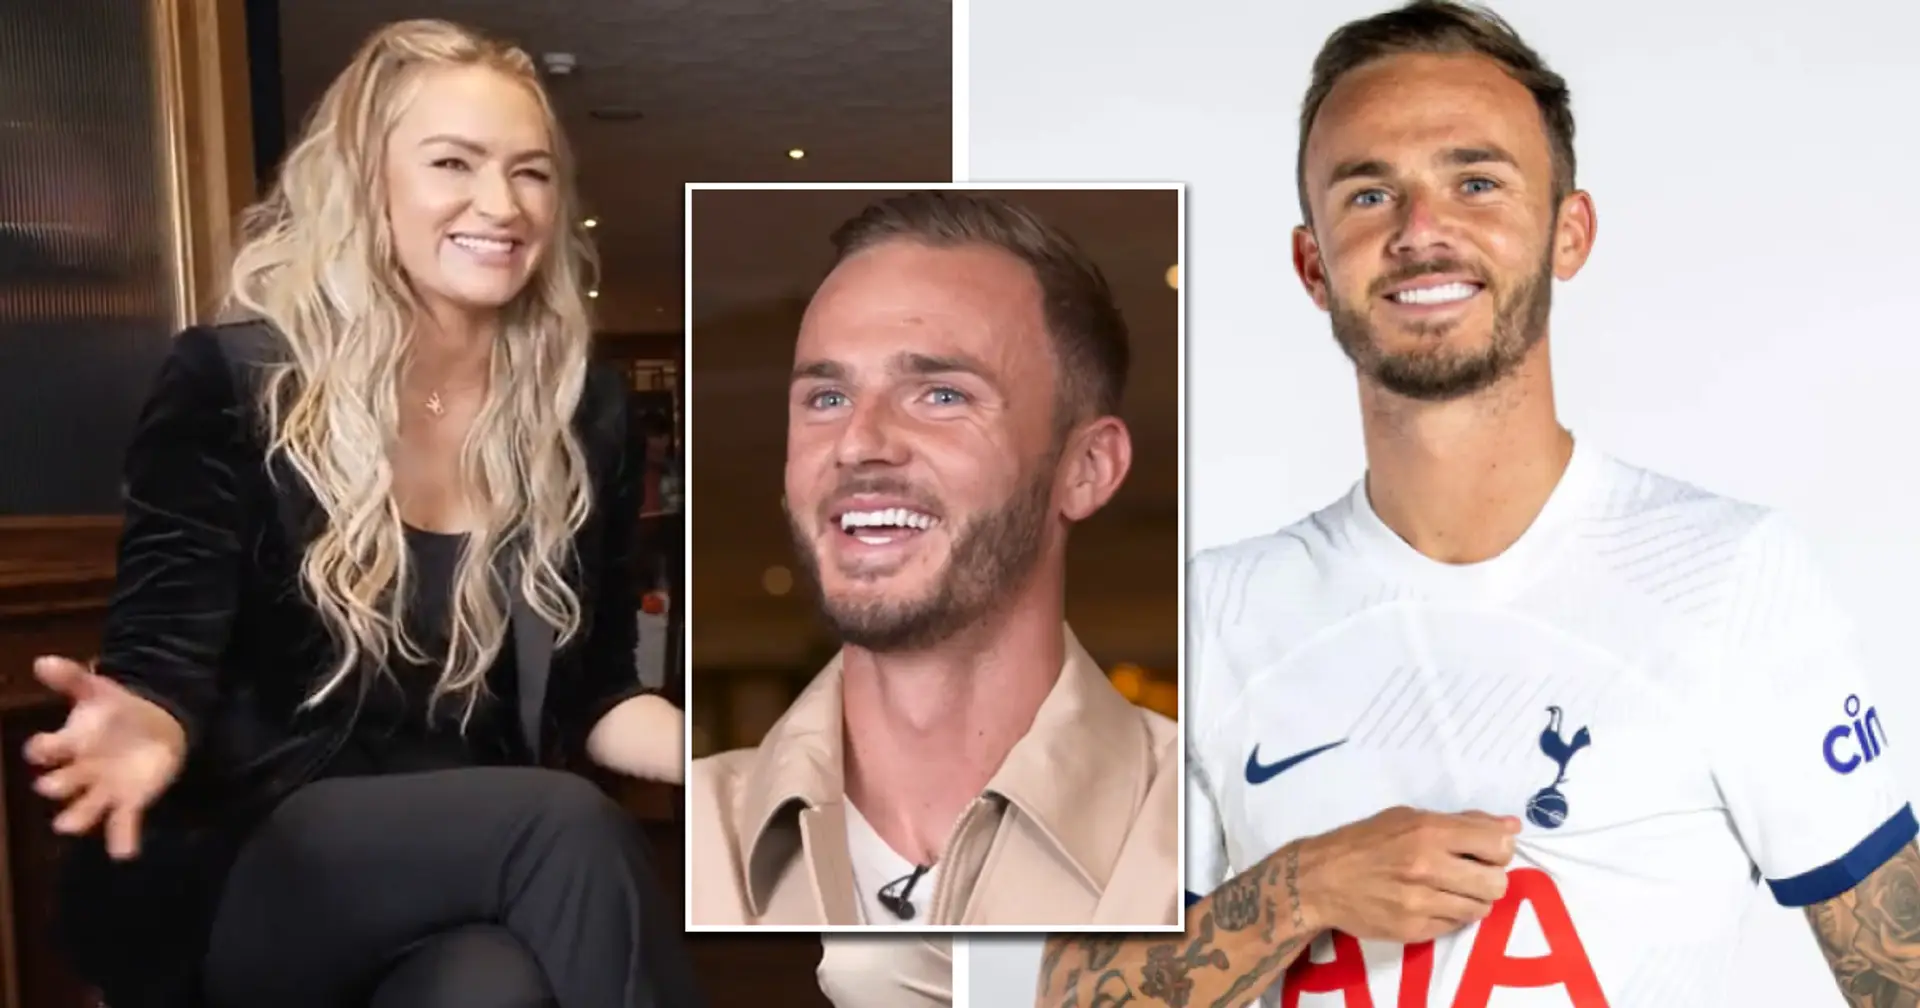 'Arsenal fan, in case you didn't know': Laura Woods aims dig at Tottenham during James Maddison interview